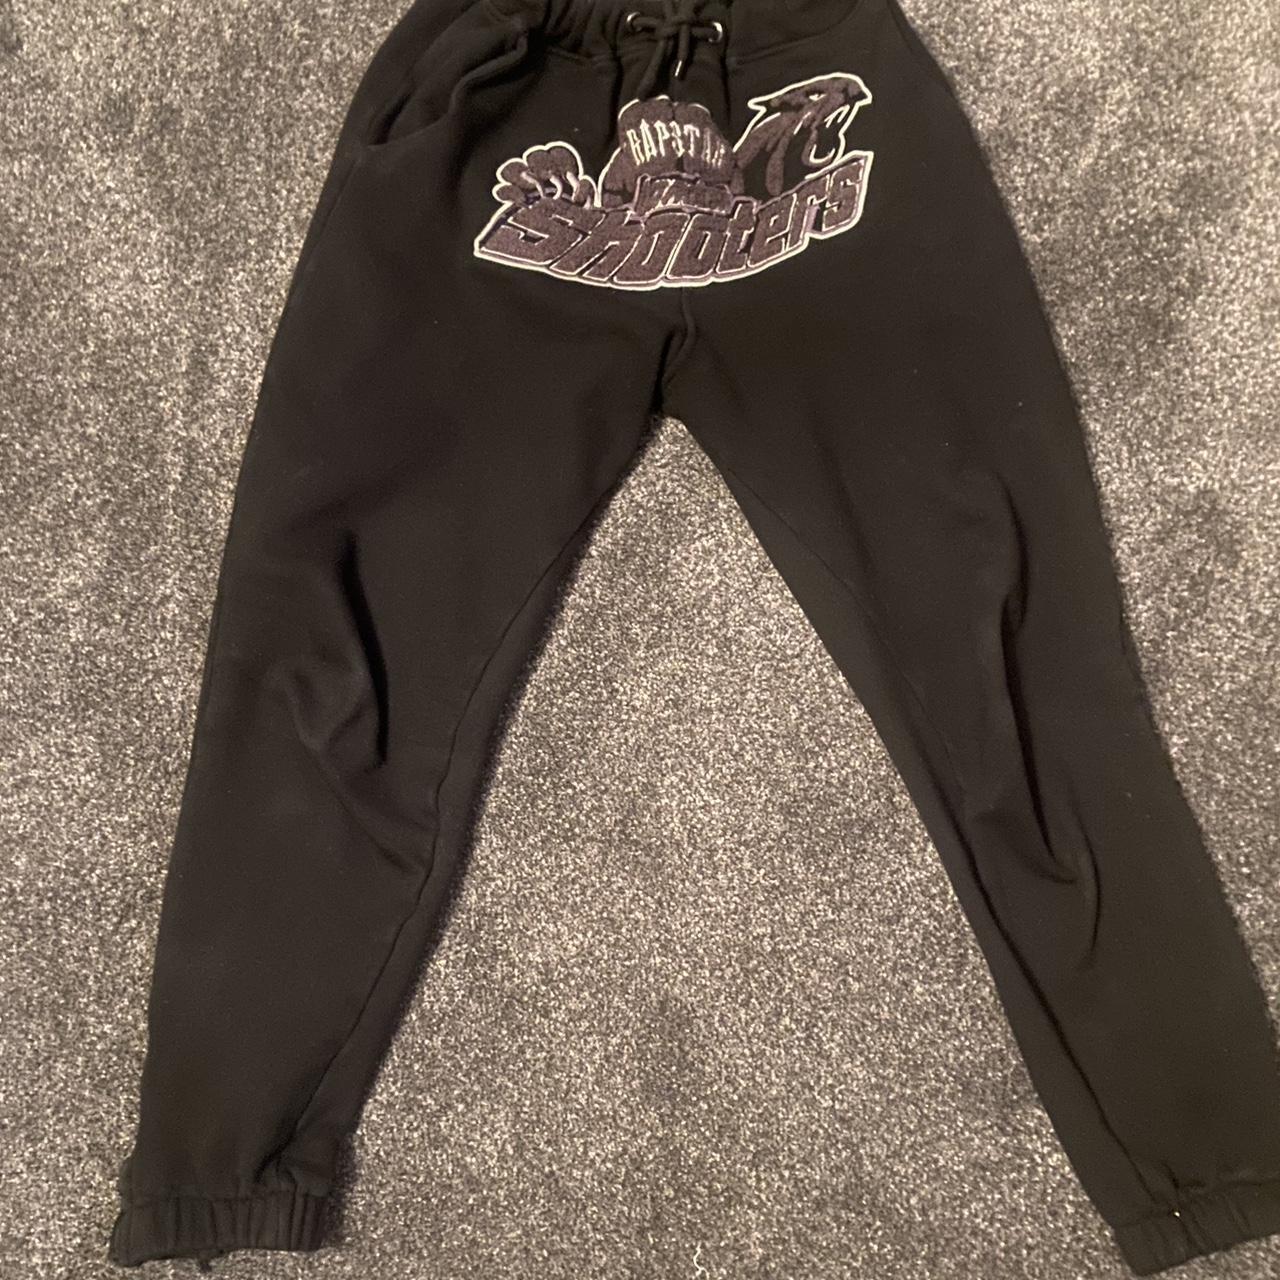 Trapstar shooters joggers size small All black One... - Depop